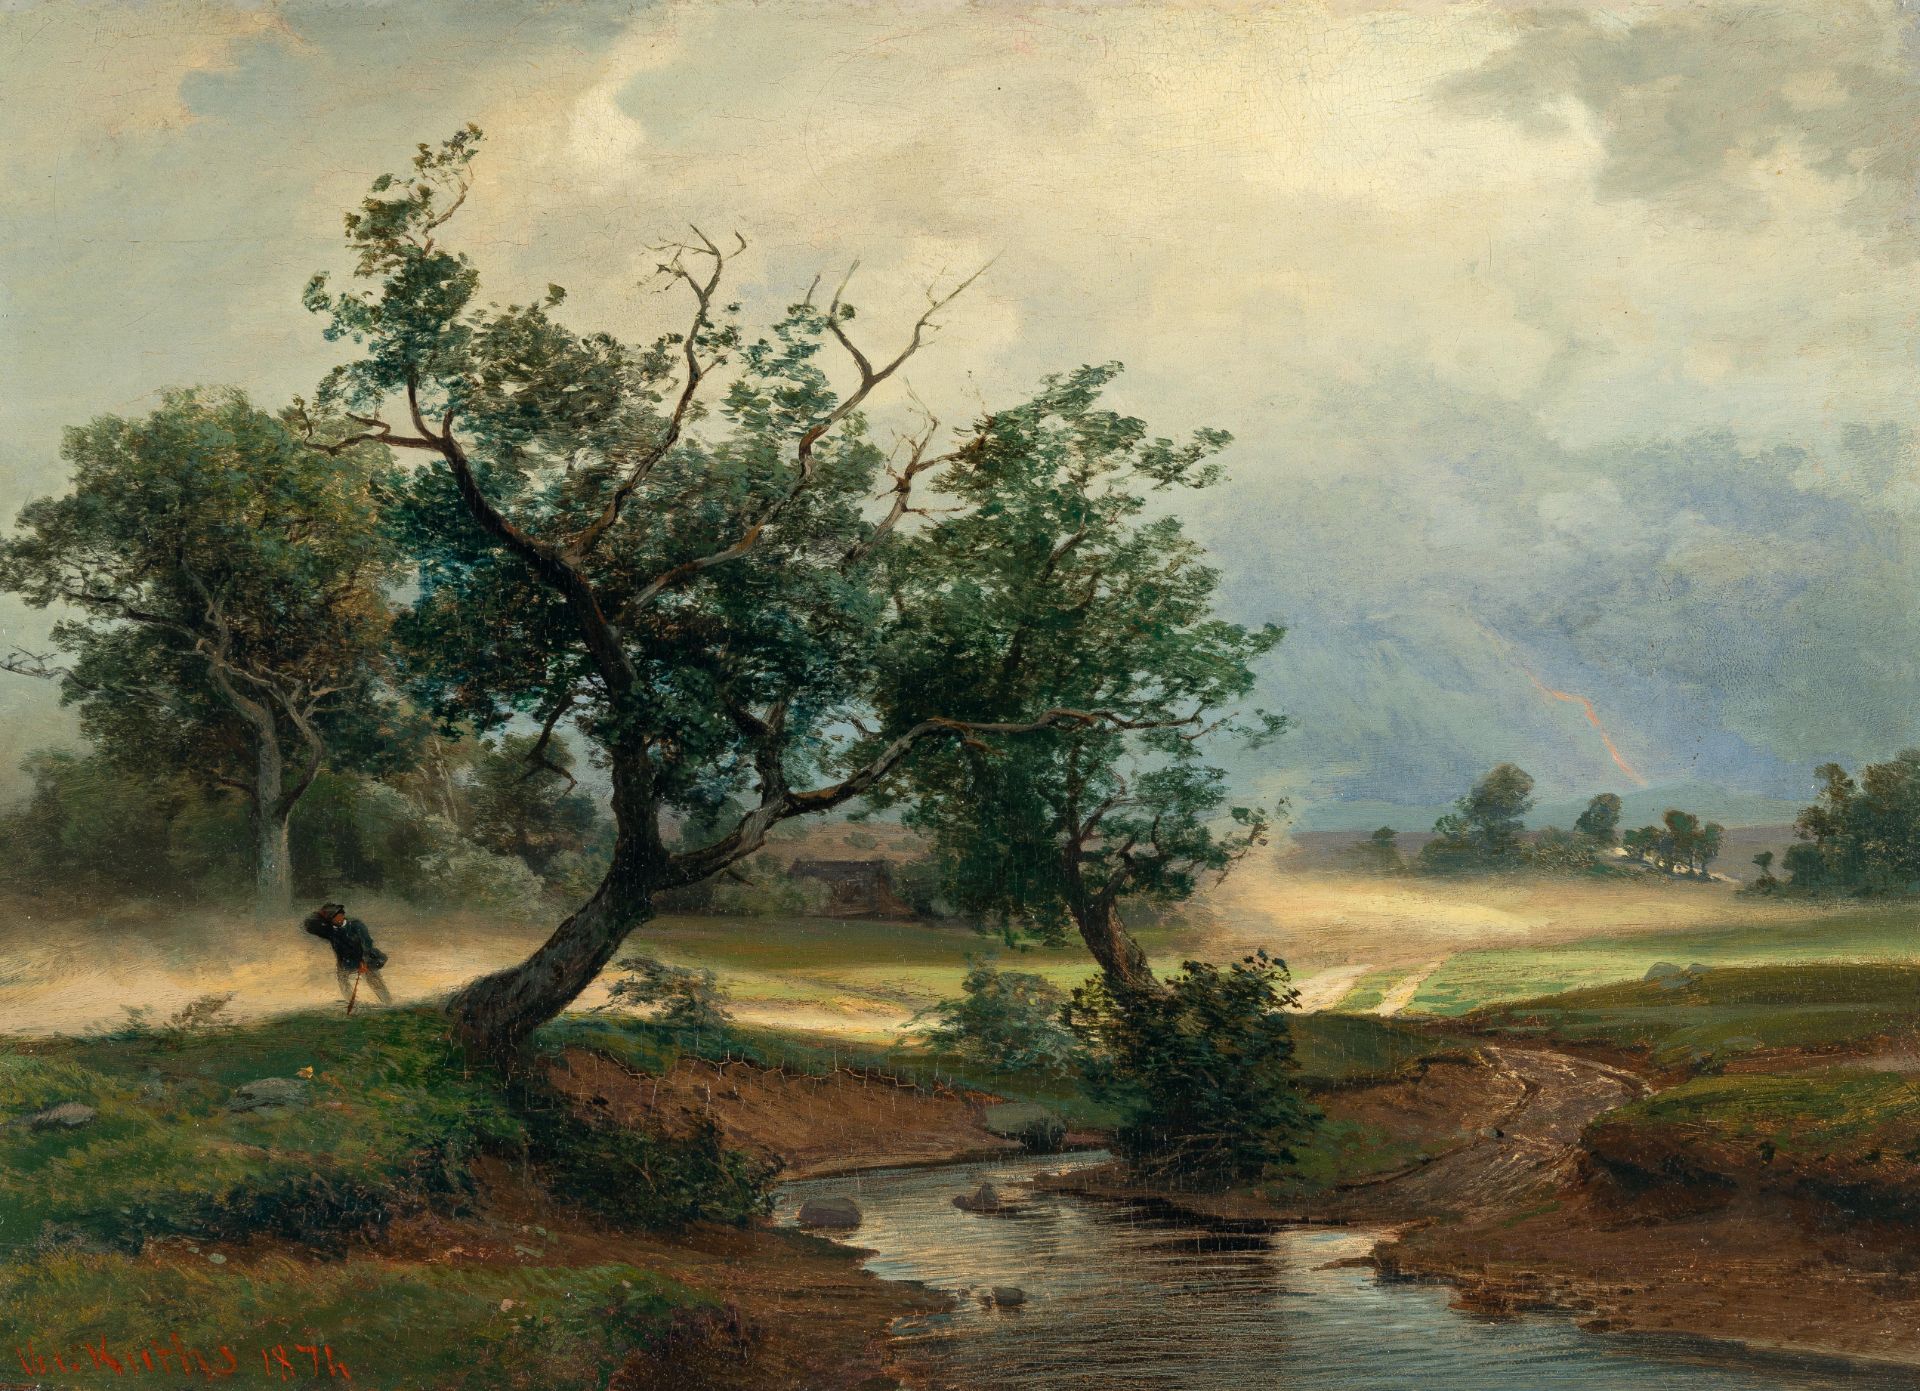 Valentin Ruths (1825 - Hamburg - 1905) – Landscape with approaching thunderstorm.Oil on panel. 1874.